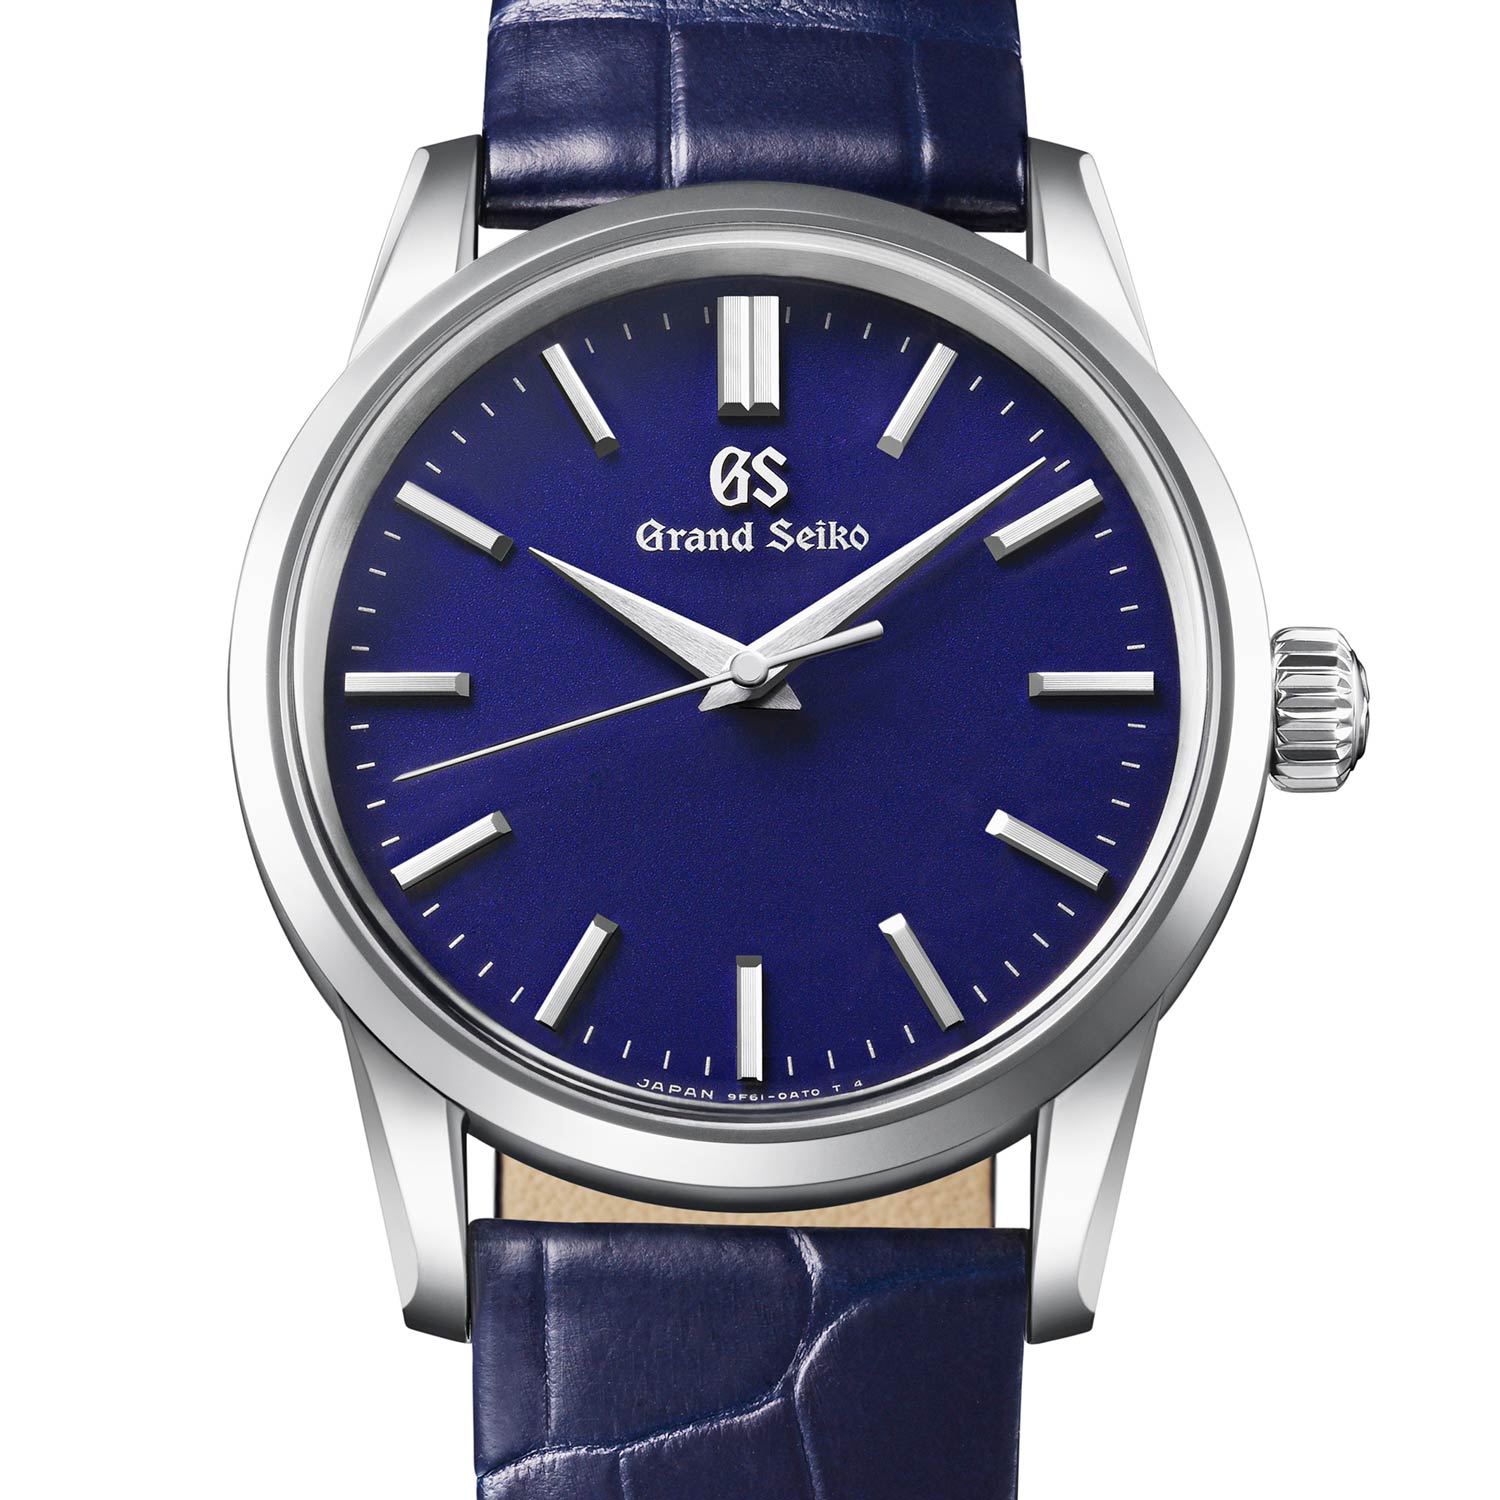 The SBGX349 has a bold, sharp look with a striking blue dial that evokes the sky